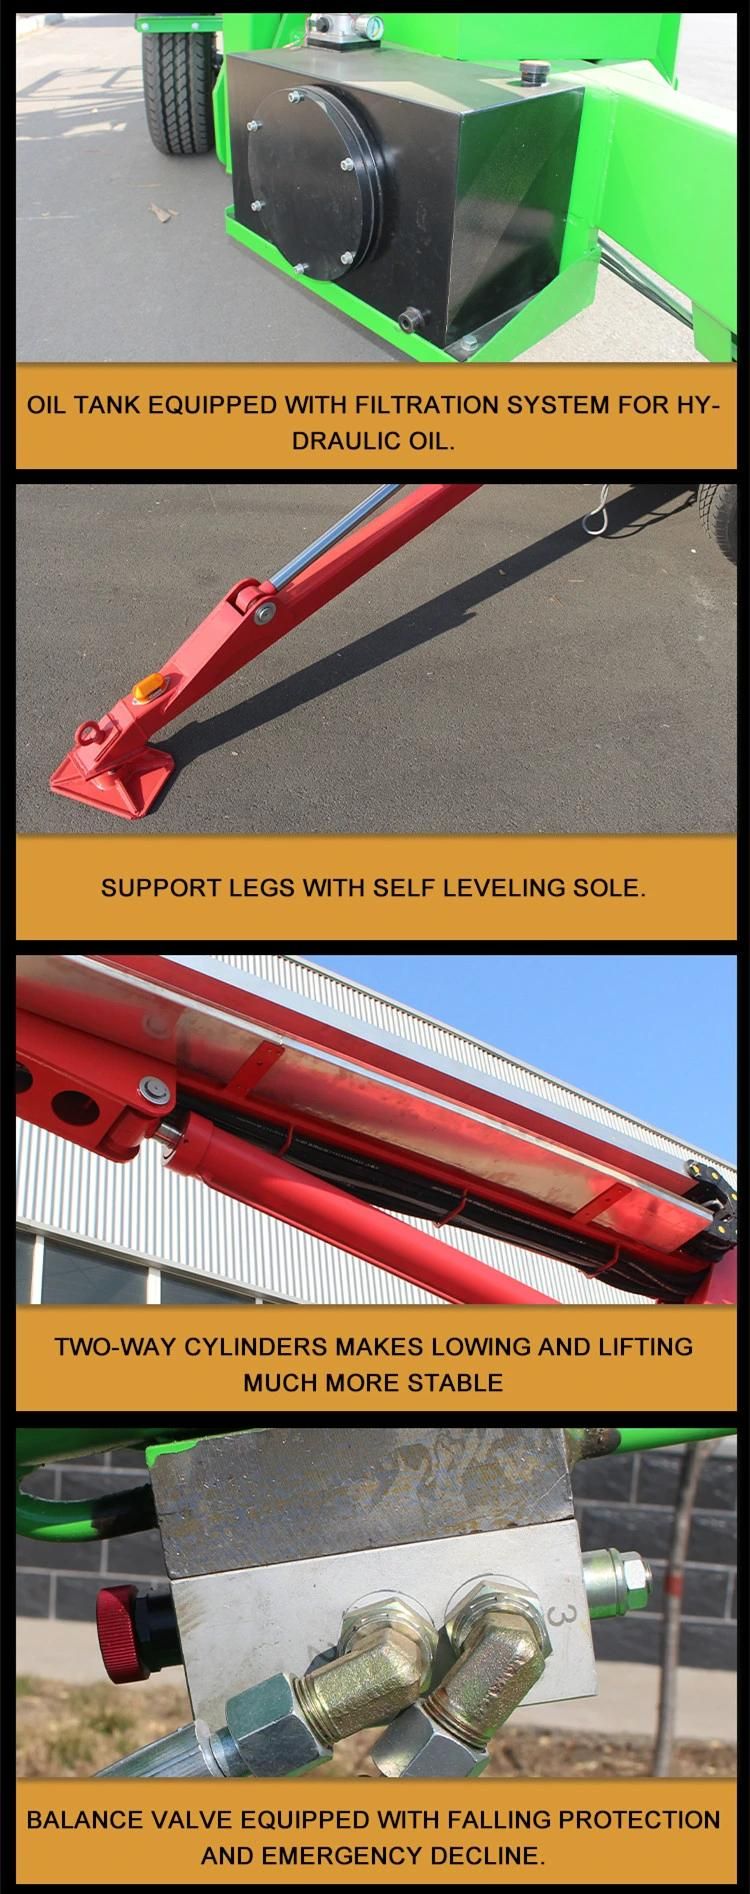 10m Load 200kg Cherry Picker Towable Articulated Boom Man Hydraulic Lift